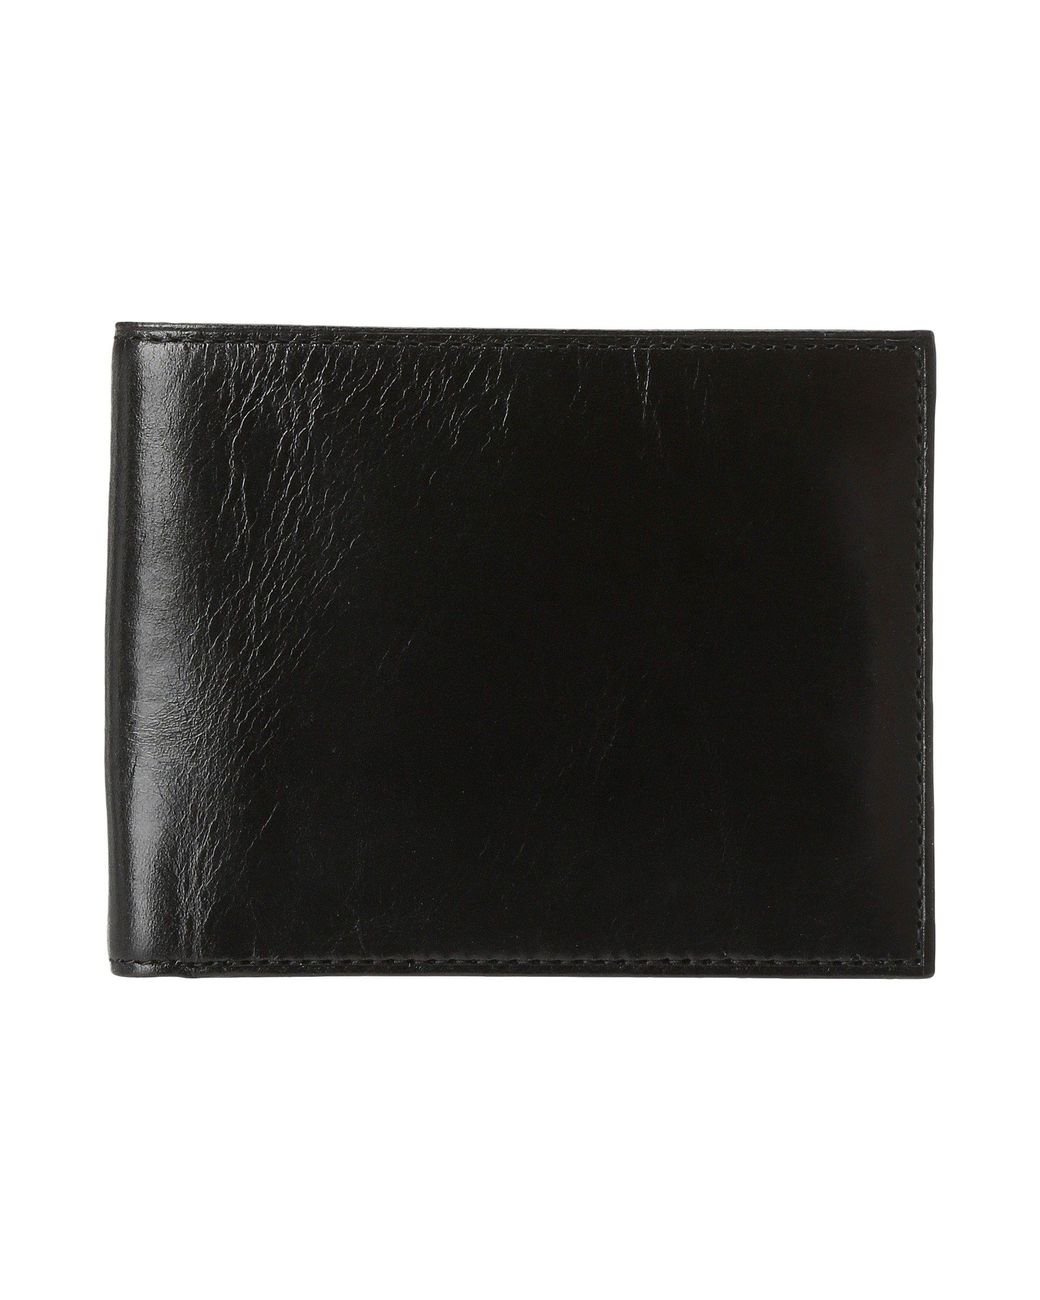 Bosca Old Leather Classic 8 Pocket Deluxe Executive Wallet in Black for ...